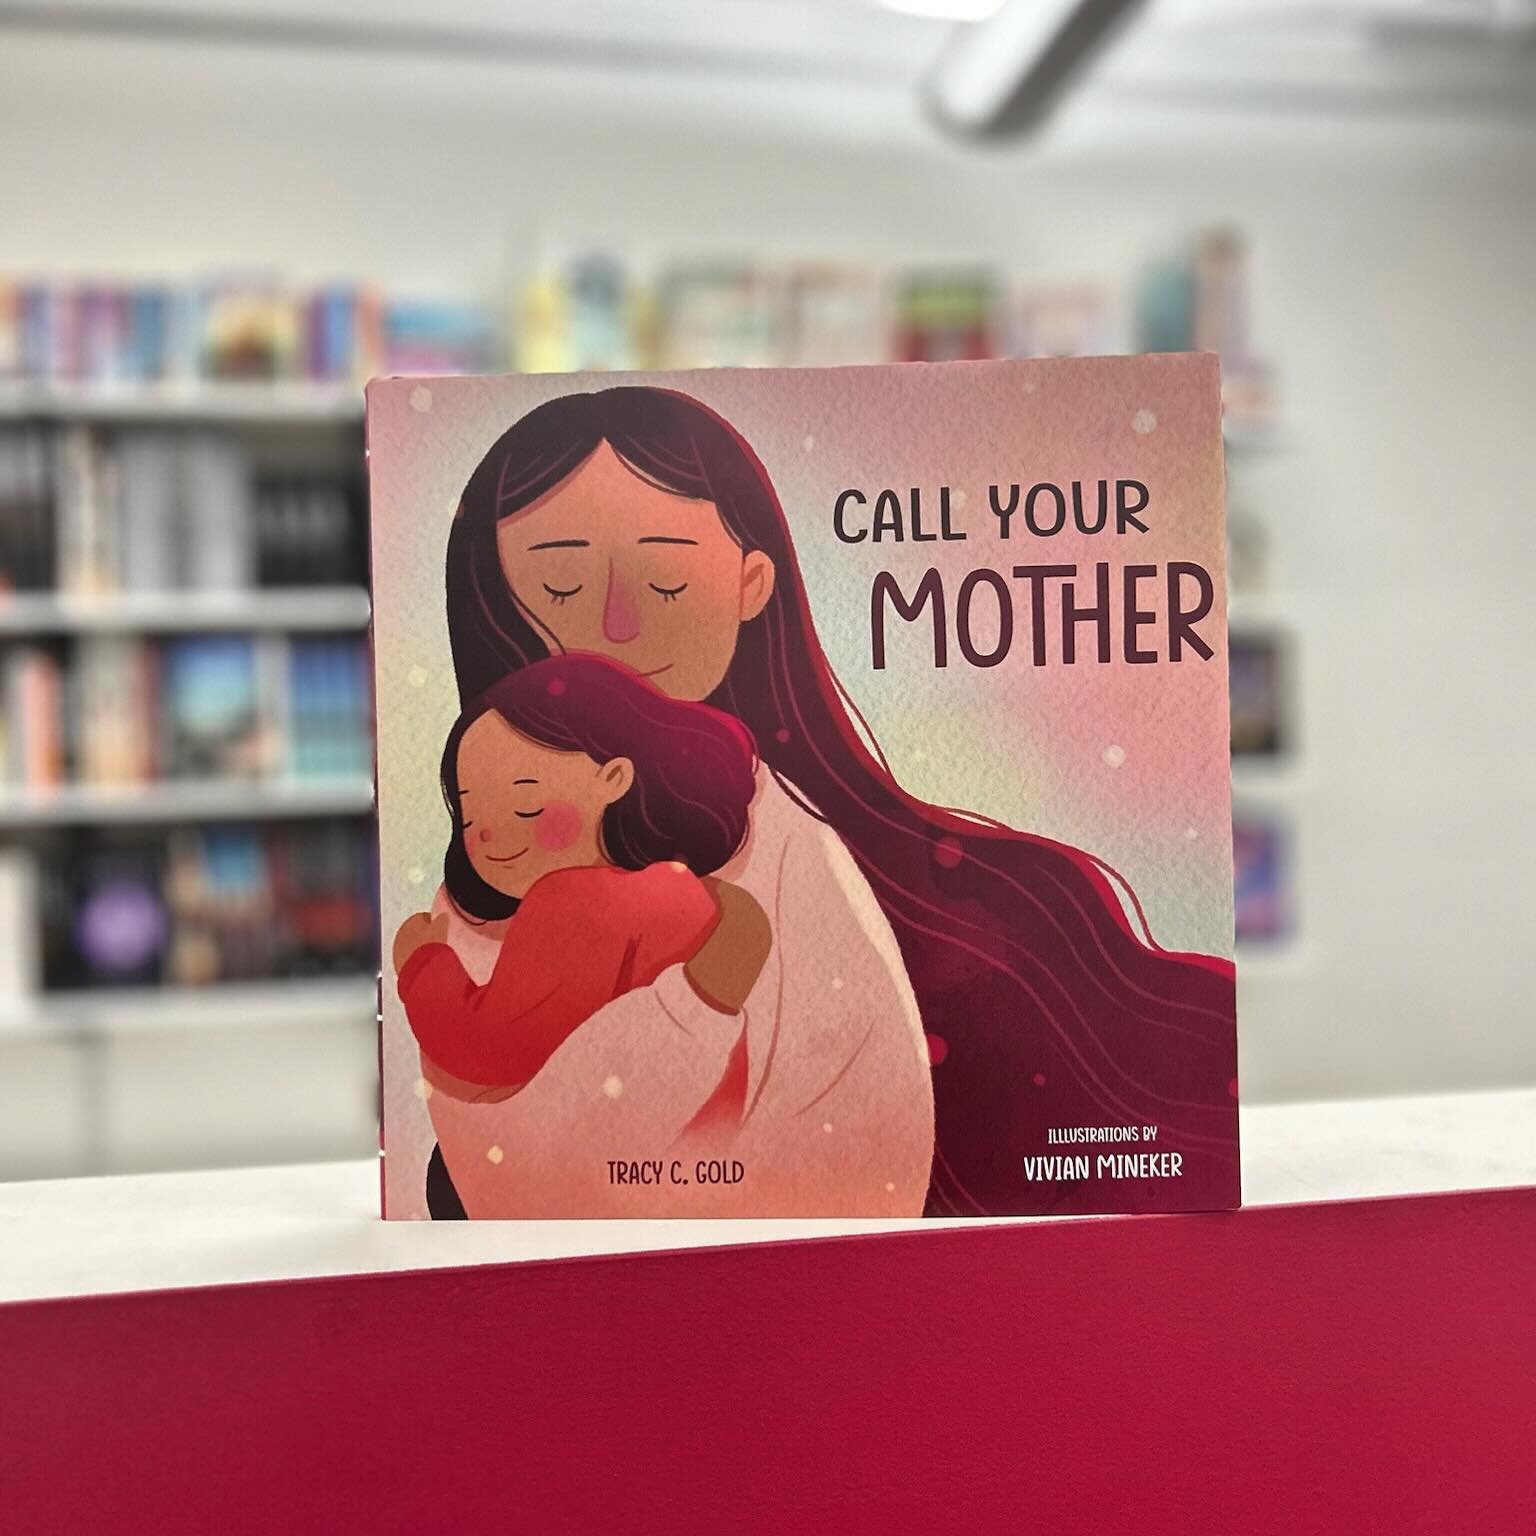 Happiest of book birthdays to @tracycgold on CALL YOUR MOTHER&mdash;a heartwarming tribute to the women who care for us all through our lives. 

Illustrated beautifully by @vivian.mineker 
Published by @familiusbooks 
.
.
.
#bookrelease #bookbirthday